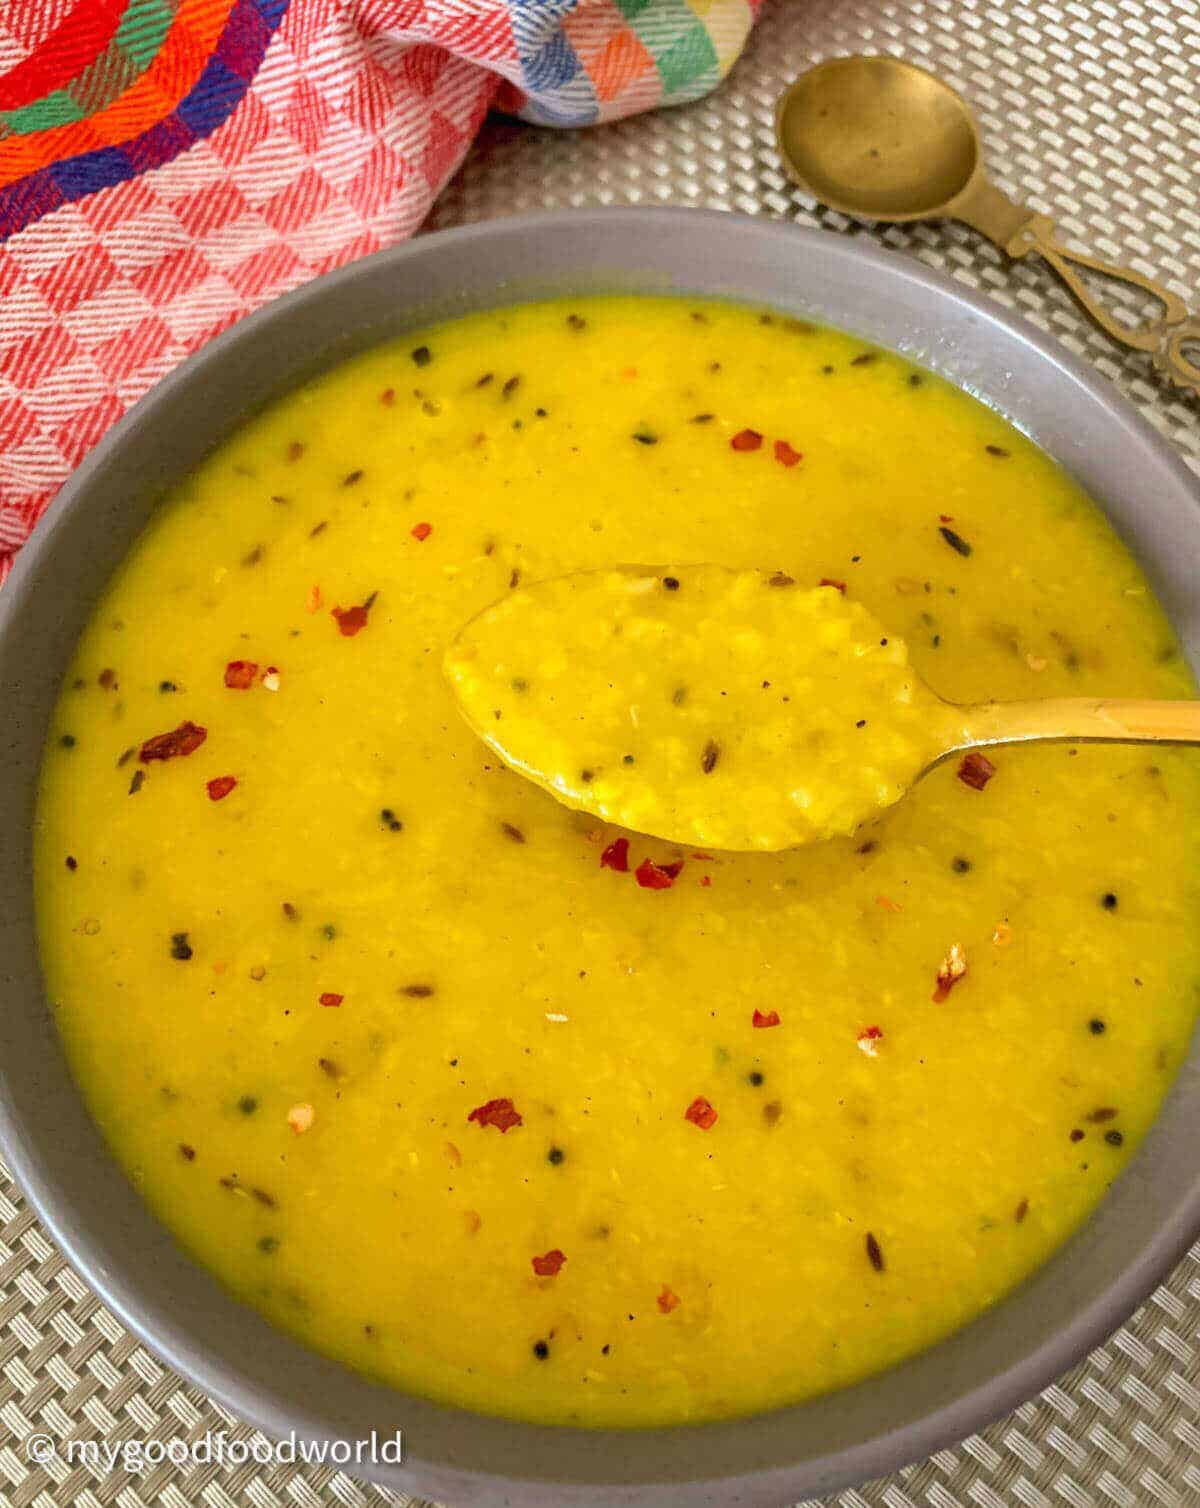 Lemony yellow lentil soup served in a round grey soup with a golden colored spoon scooping out some of the soup.